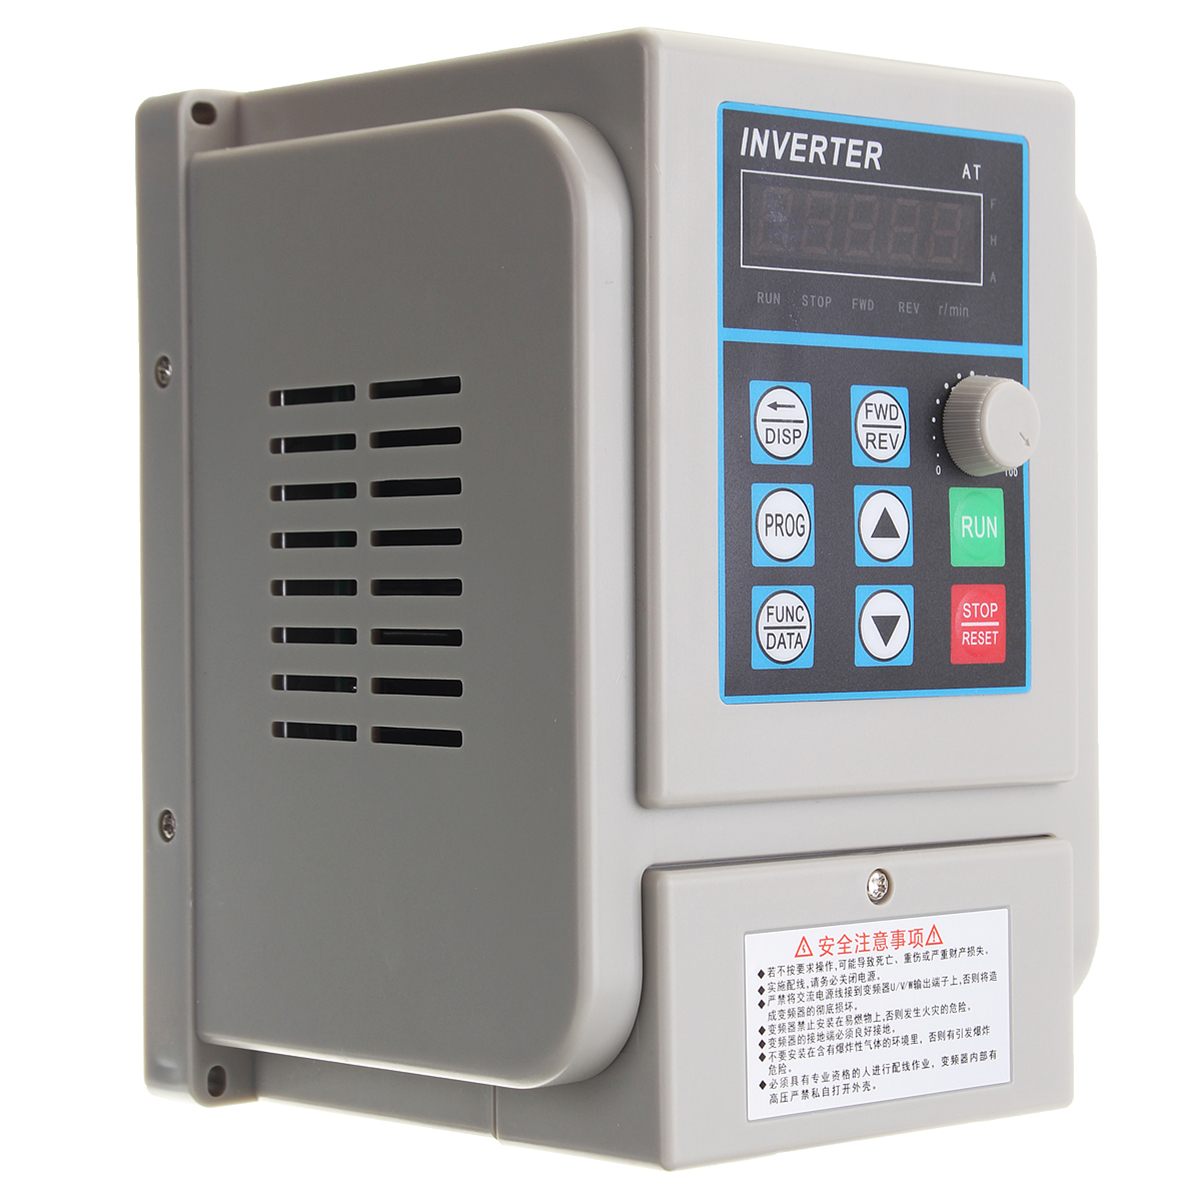 15KW-220V-1PH-In-3PH-Out-Variable-Frequency-Converter-Motor-Vector-Control-1271152